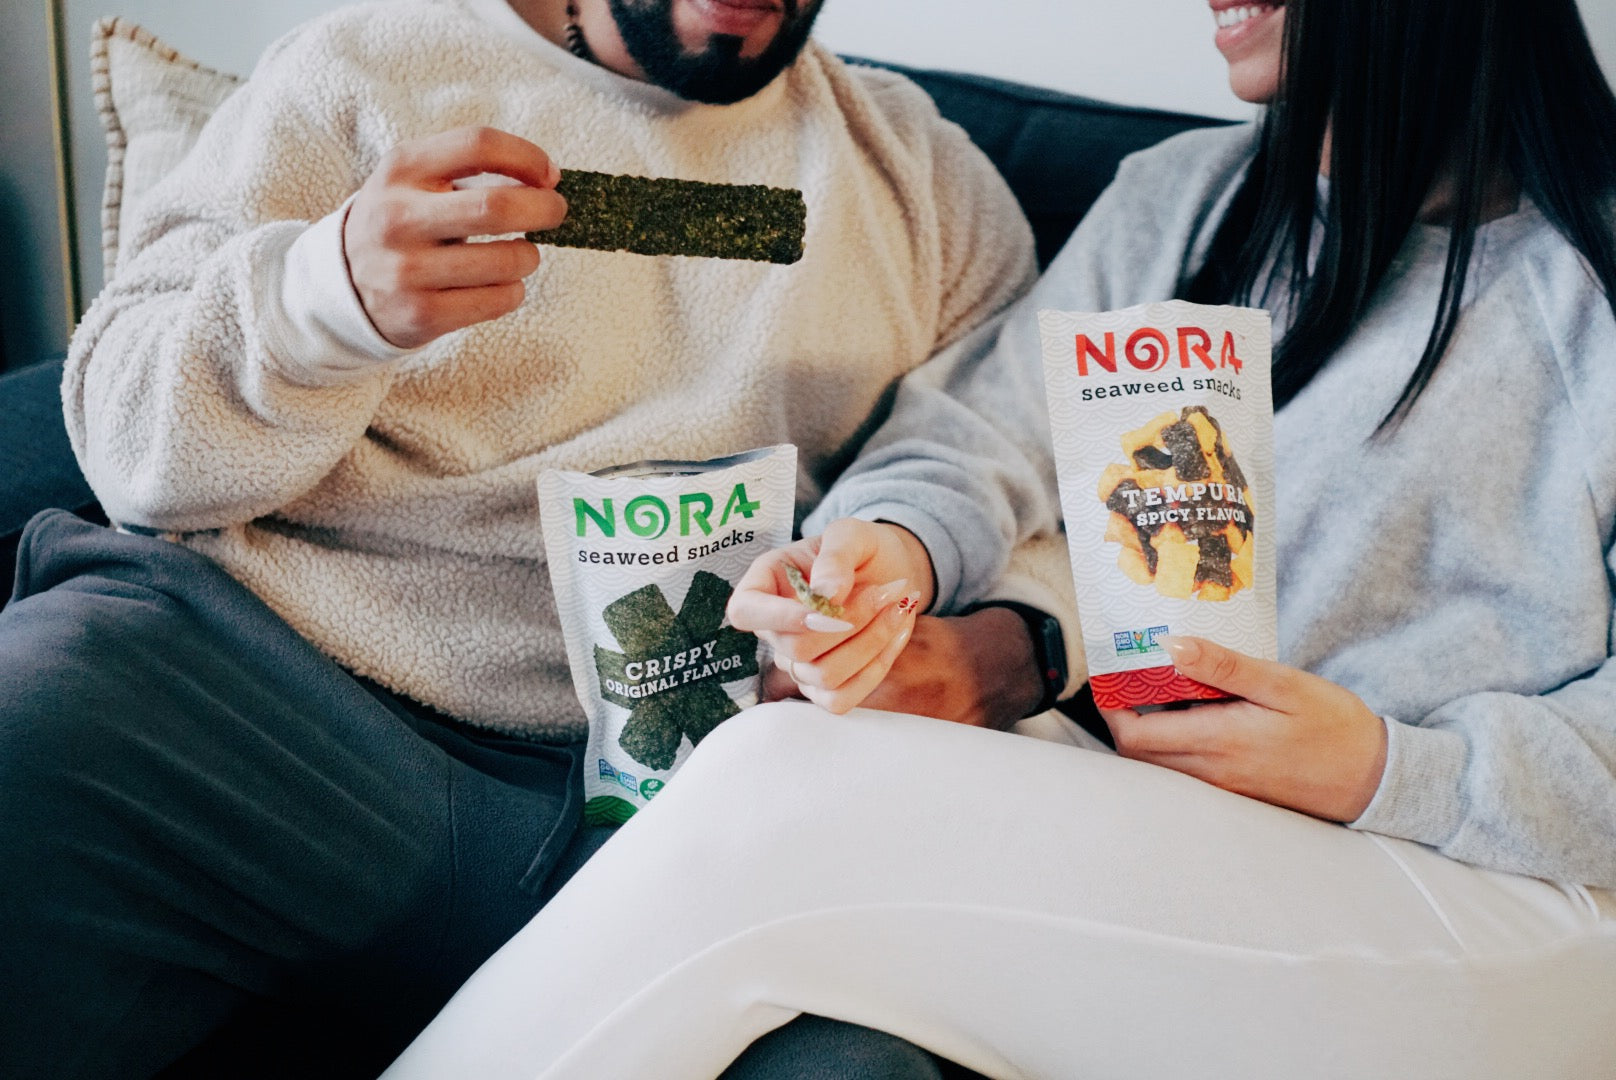 A couple is enjoying andd sharing Nora Seaweed Snacks on a couch